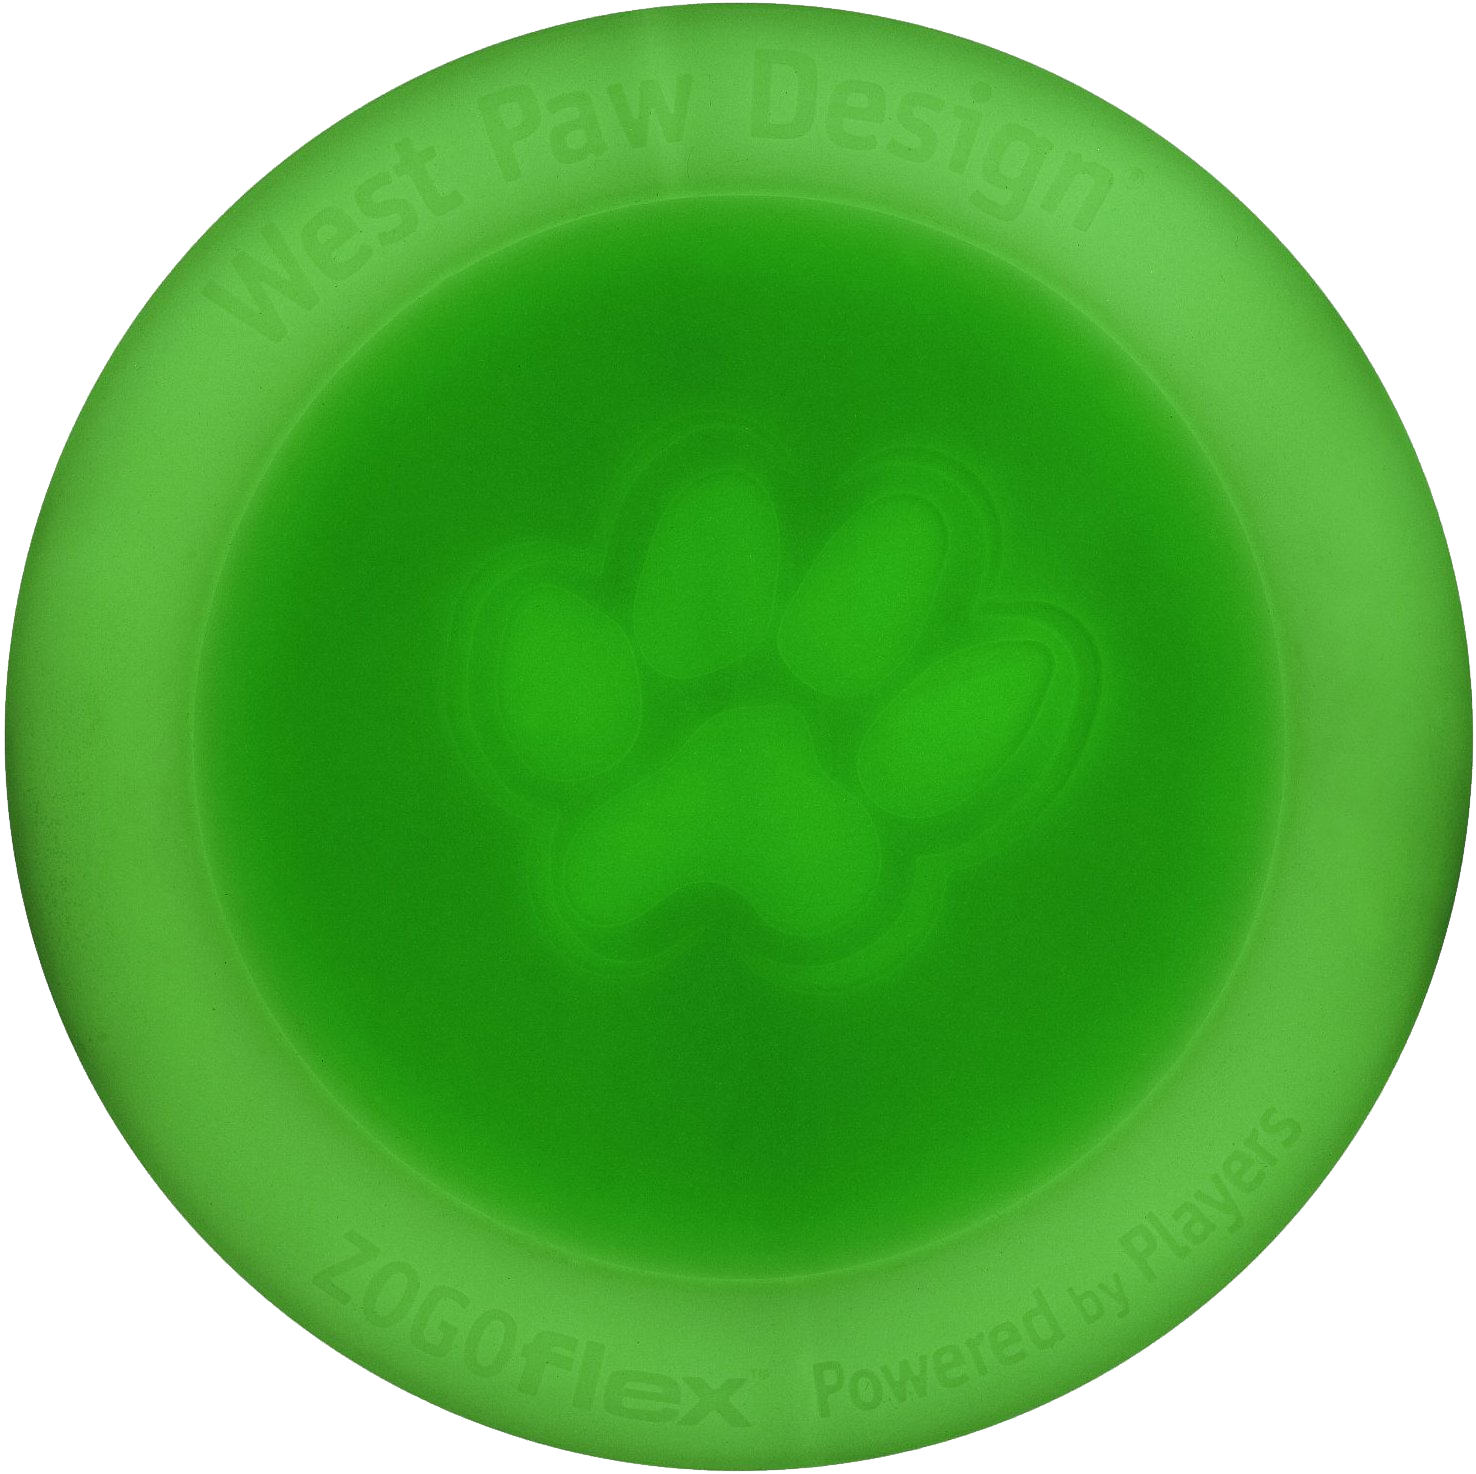 Frisbee Png - Carlac, Transparent Png